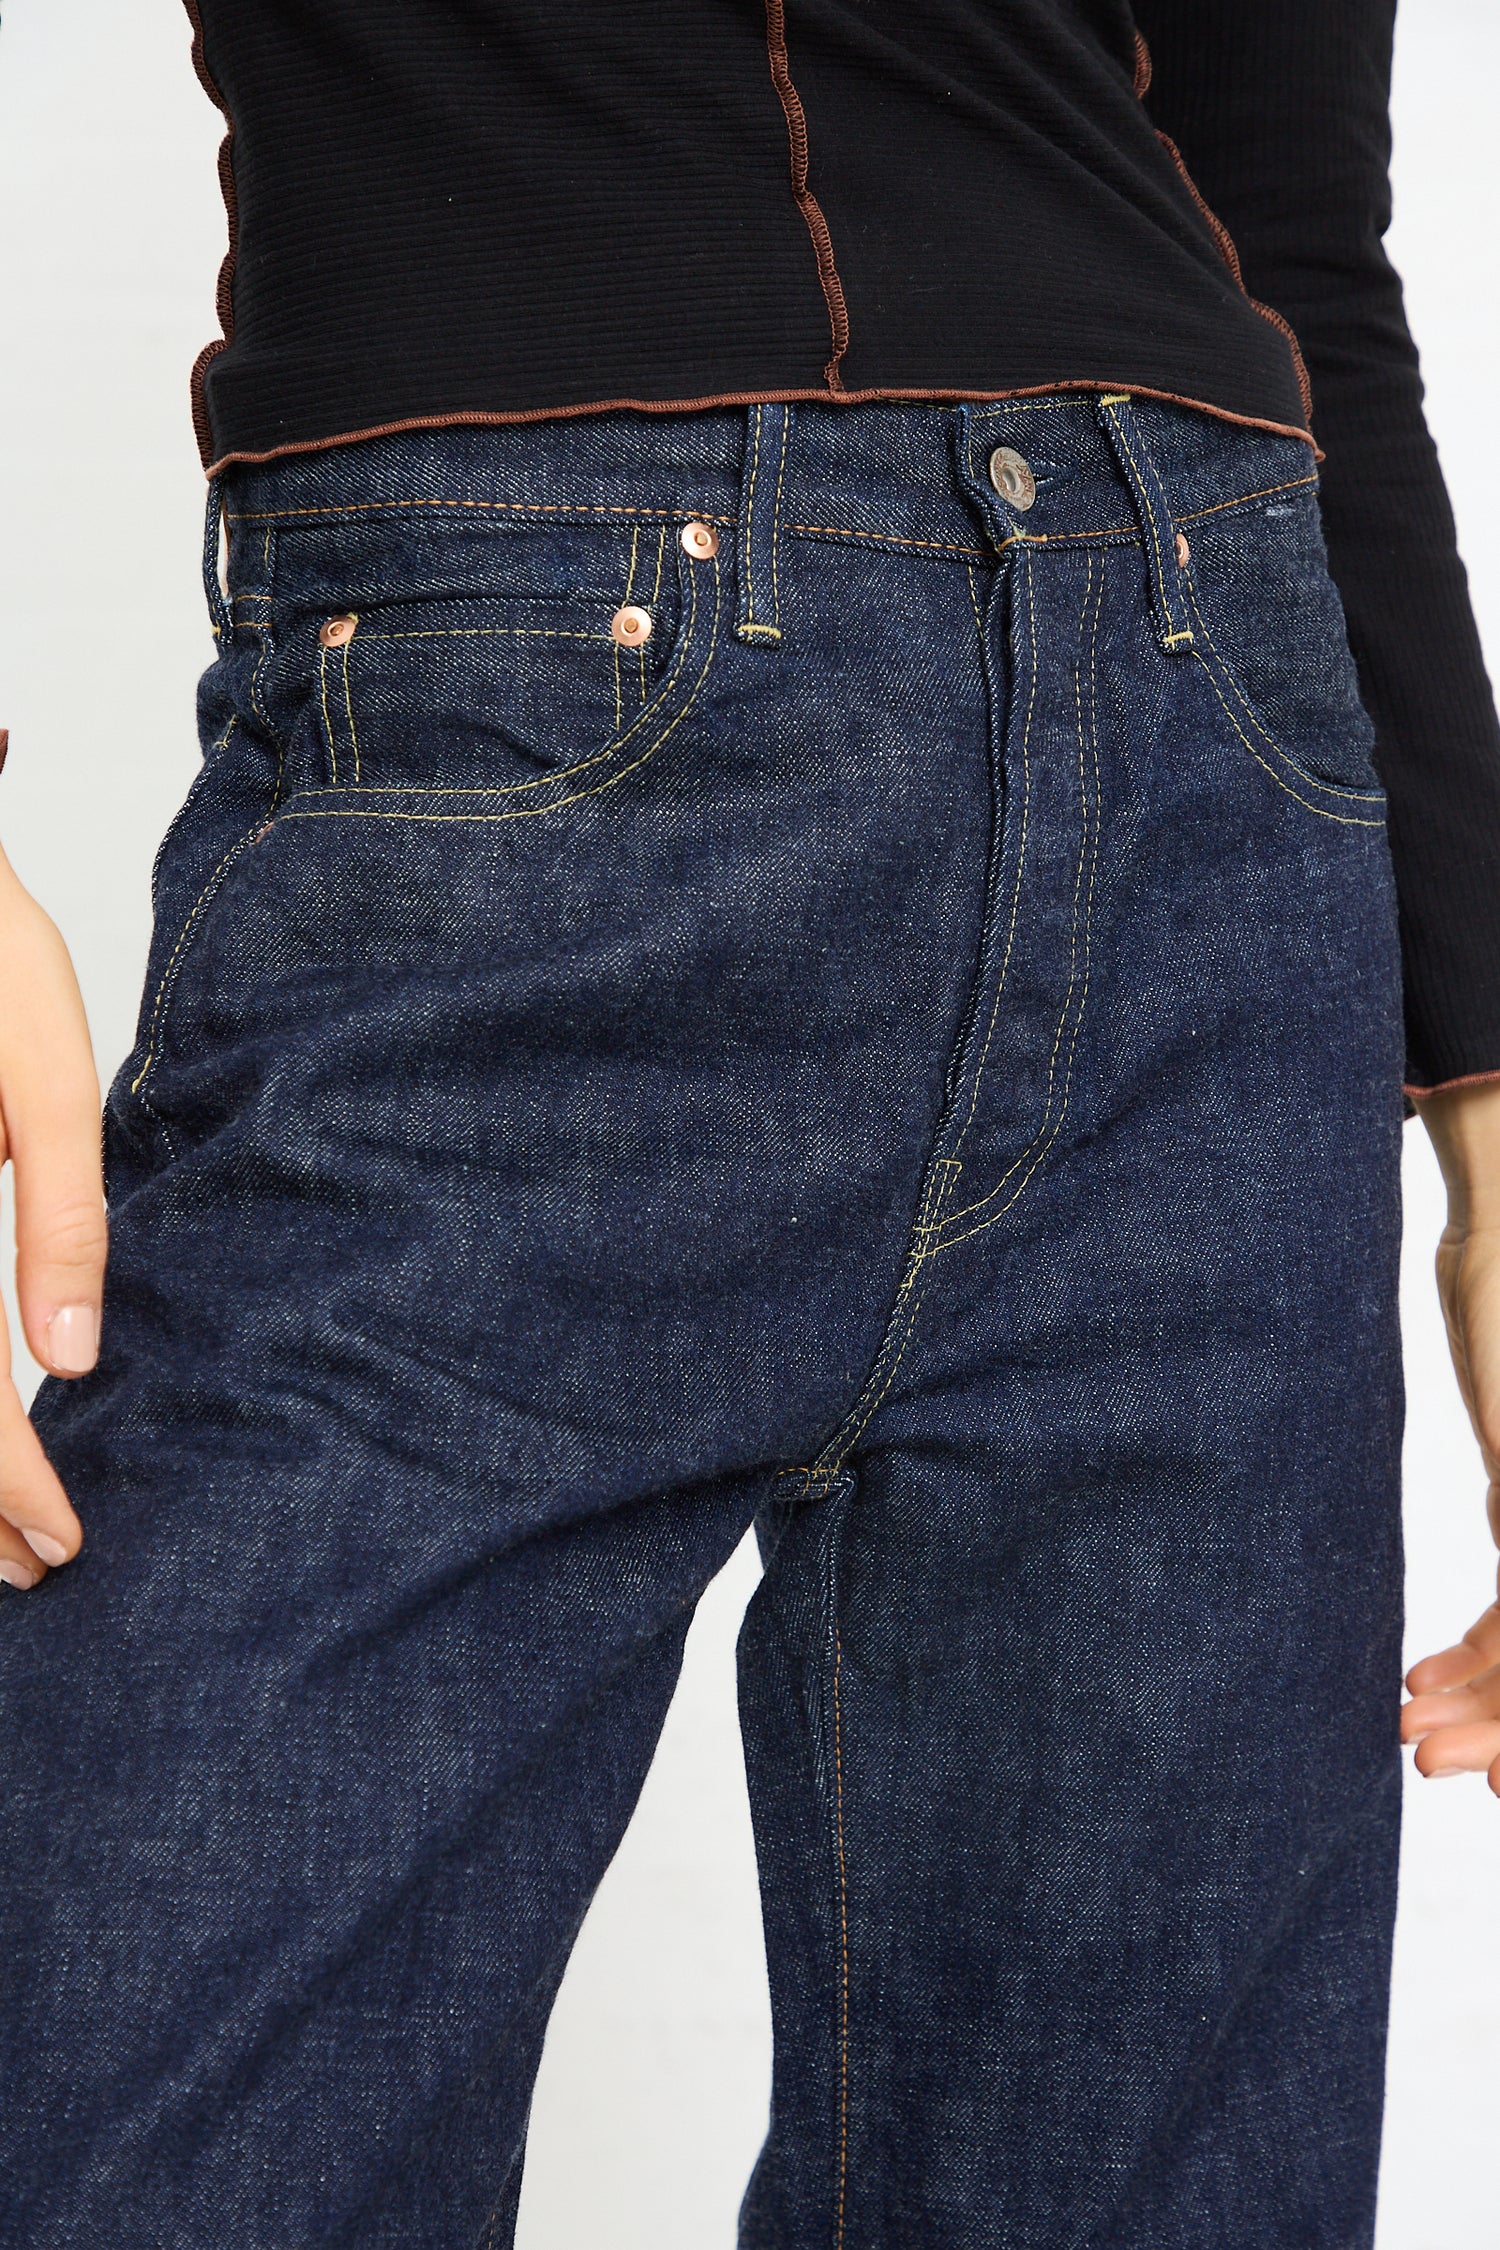 Close-up of a person wearing blue Chimala 13.5 oz. Selvedge Denim Straight Cut in Rinse jeans and a black top.